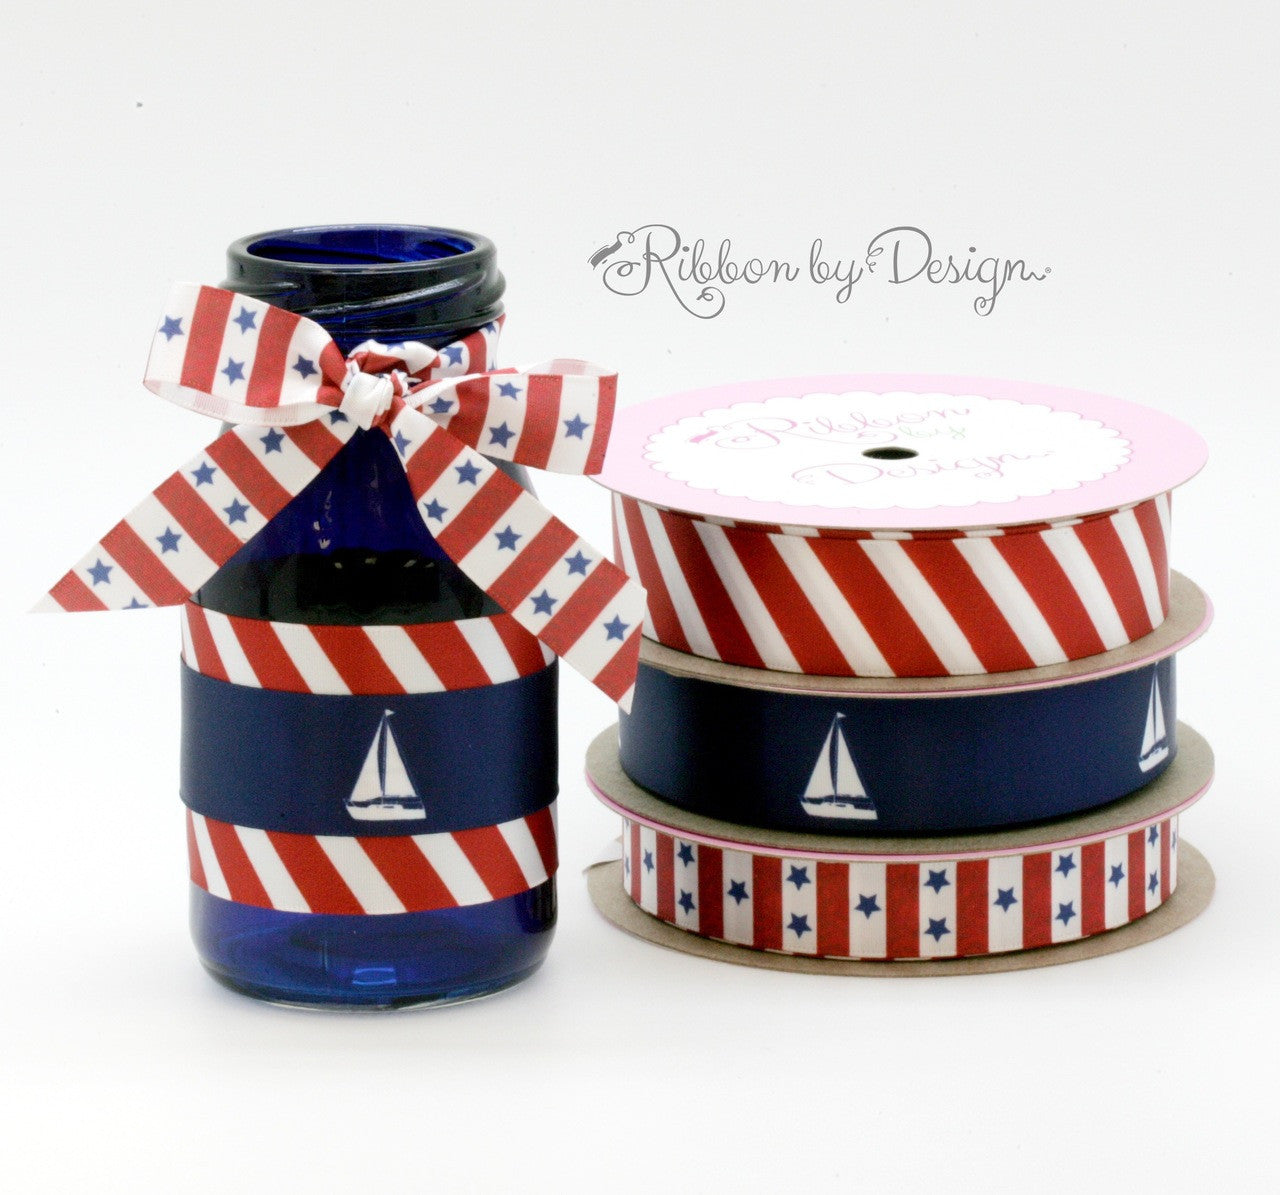 Adding our stars and stripes to any nautical themed design adds a bit of patriotism to the party.